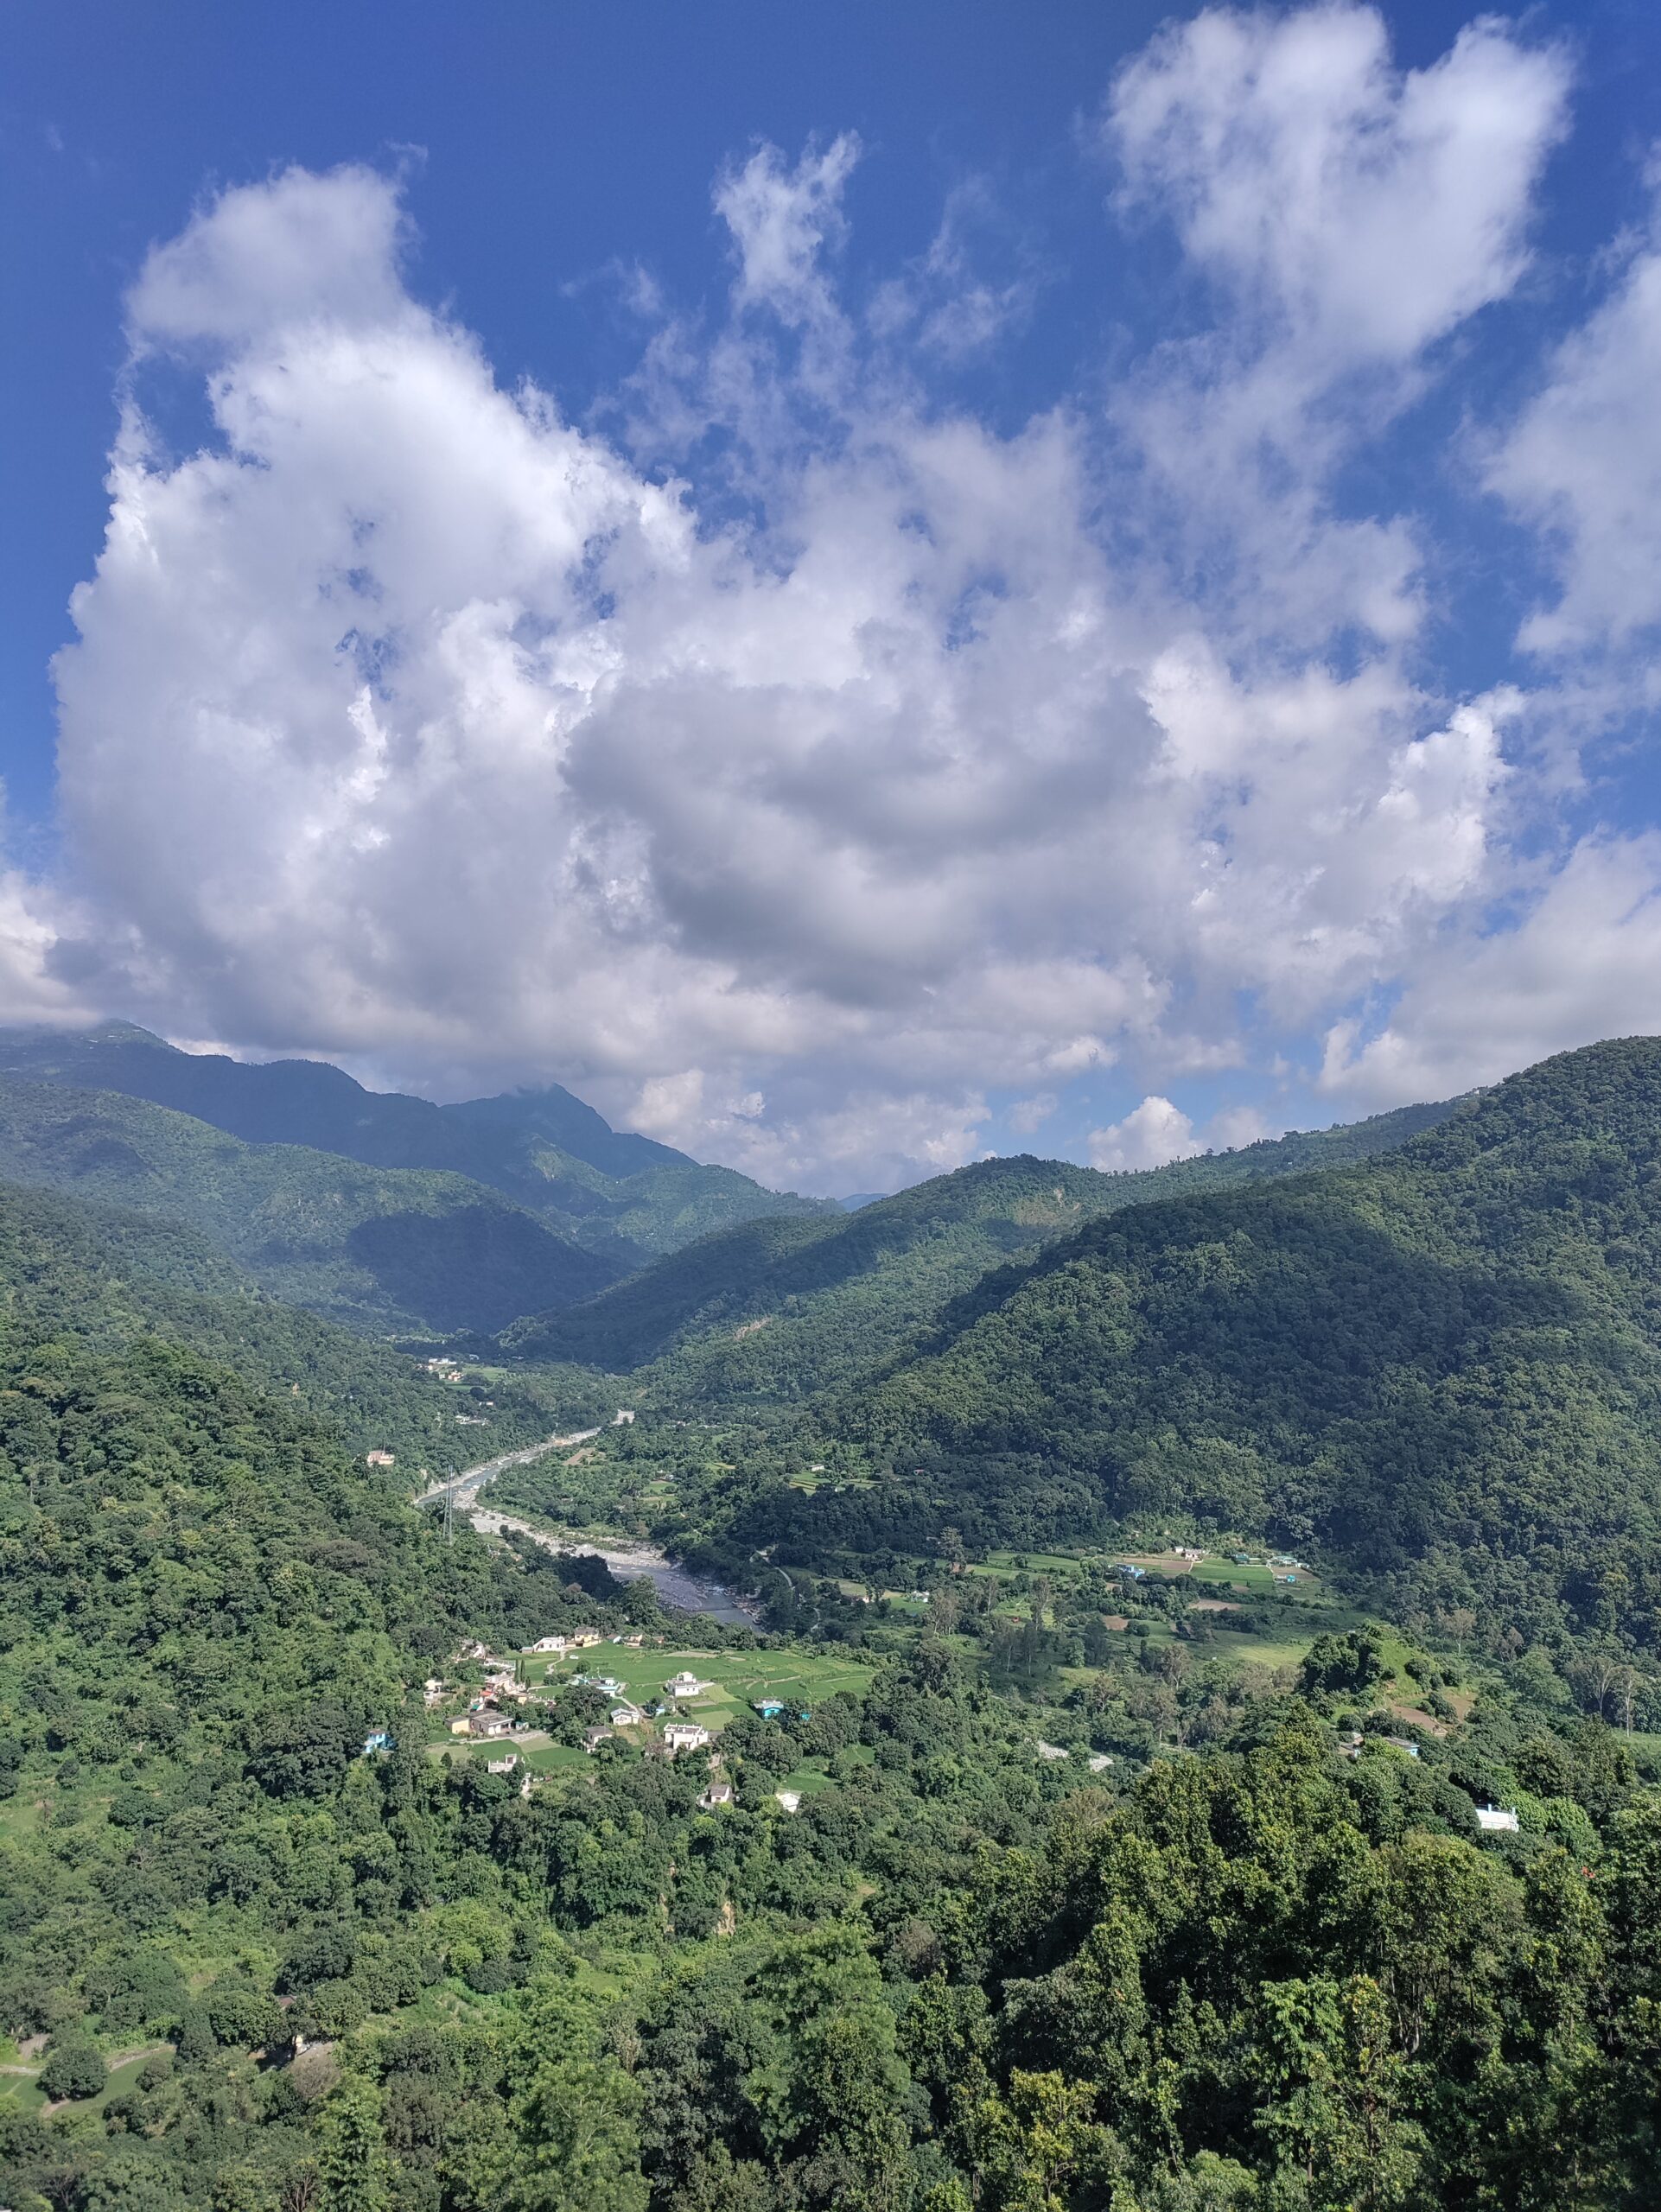 Soaring Hills of Kumaon region with Bouncy Castles